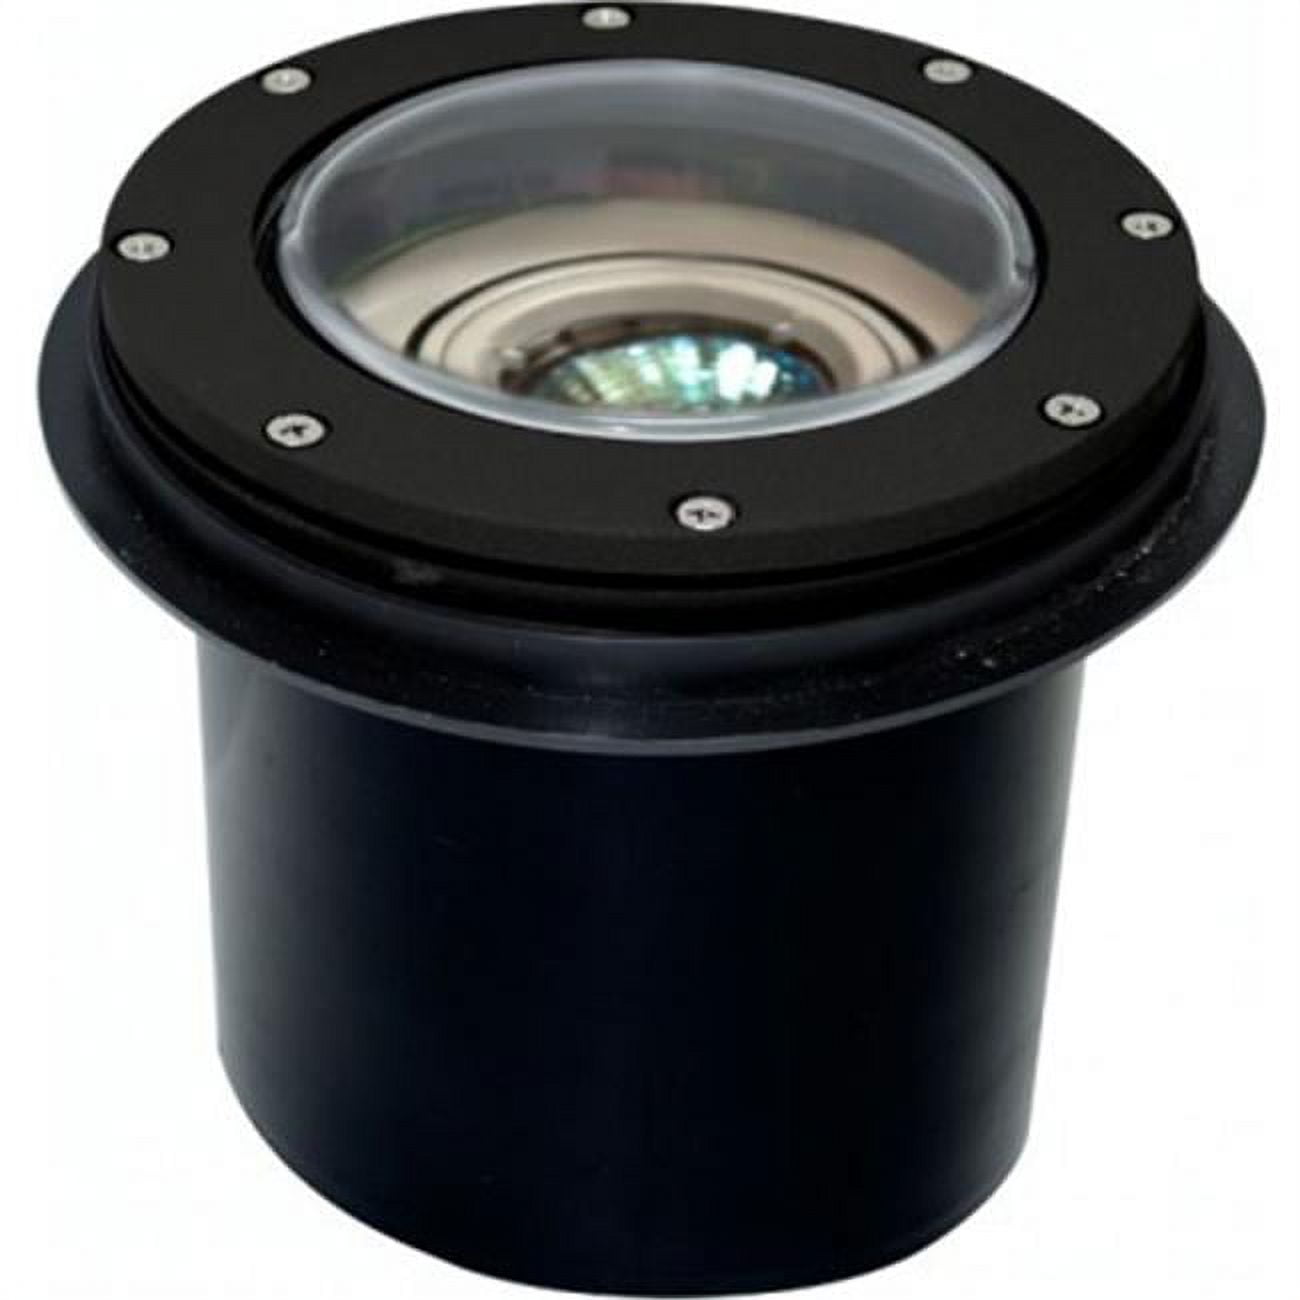 Picture of Dabmar Lighting LV306-LED3-B-MR Cast Aluminum LED In-Ground Well Light with PVC Sleeve, Black - 6.50 x 7.75 x 7.75 in.